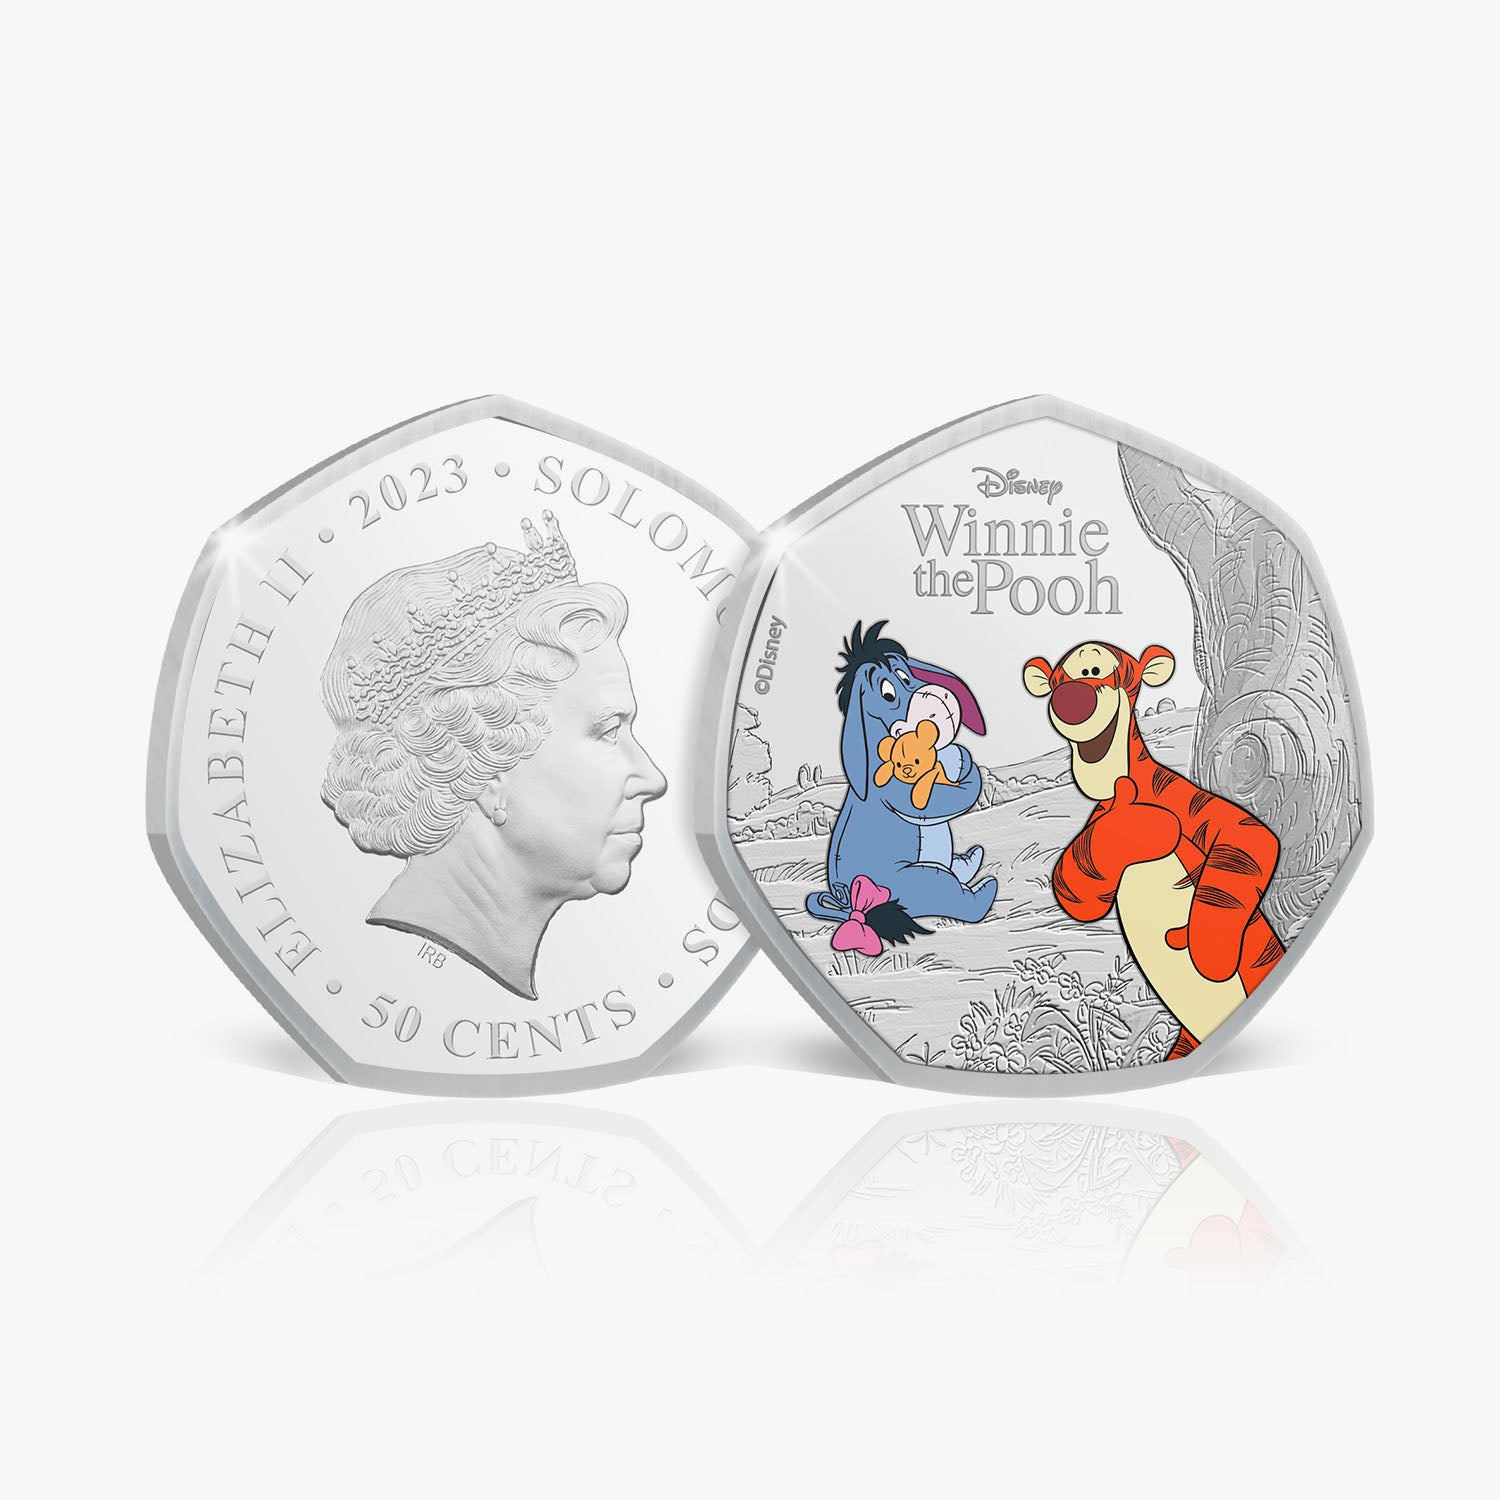 The Winnie the Pooh 2023 Tigger and Eeyore Coin